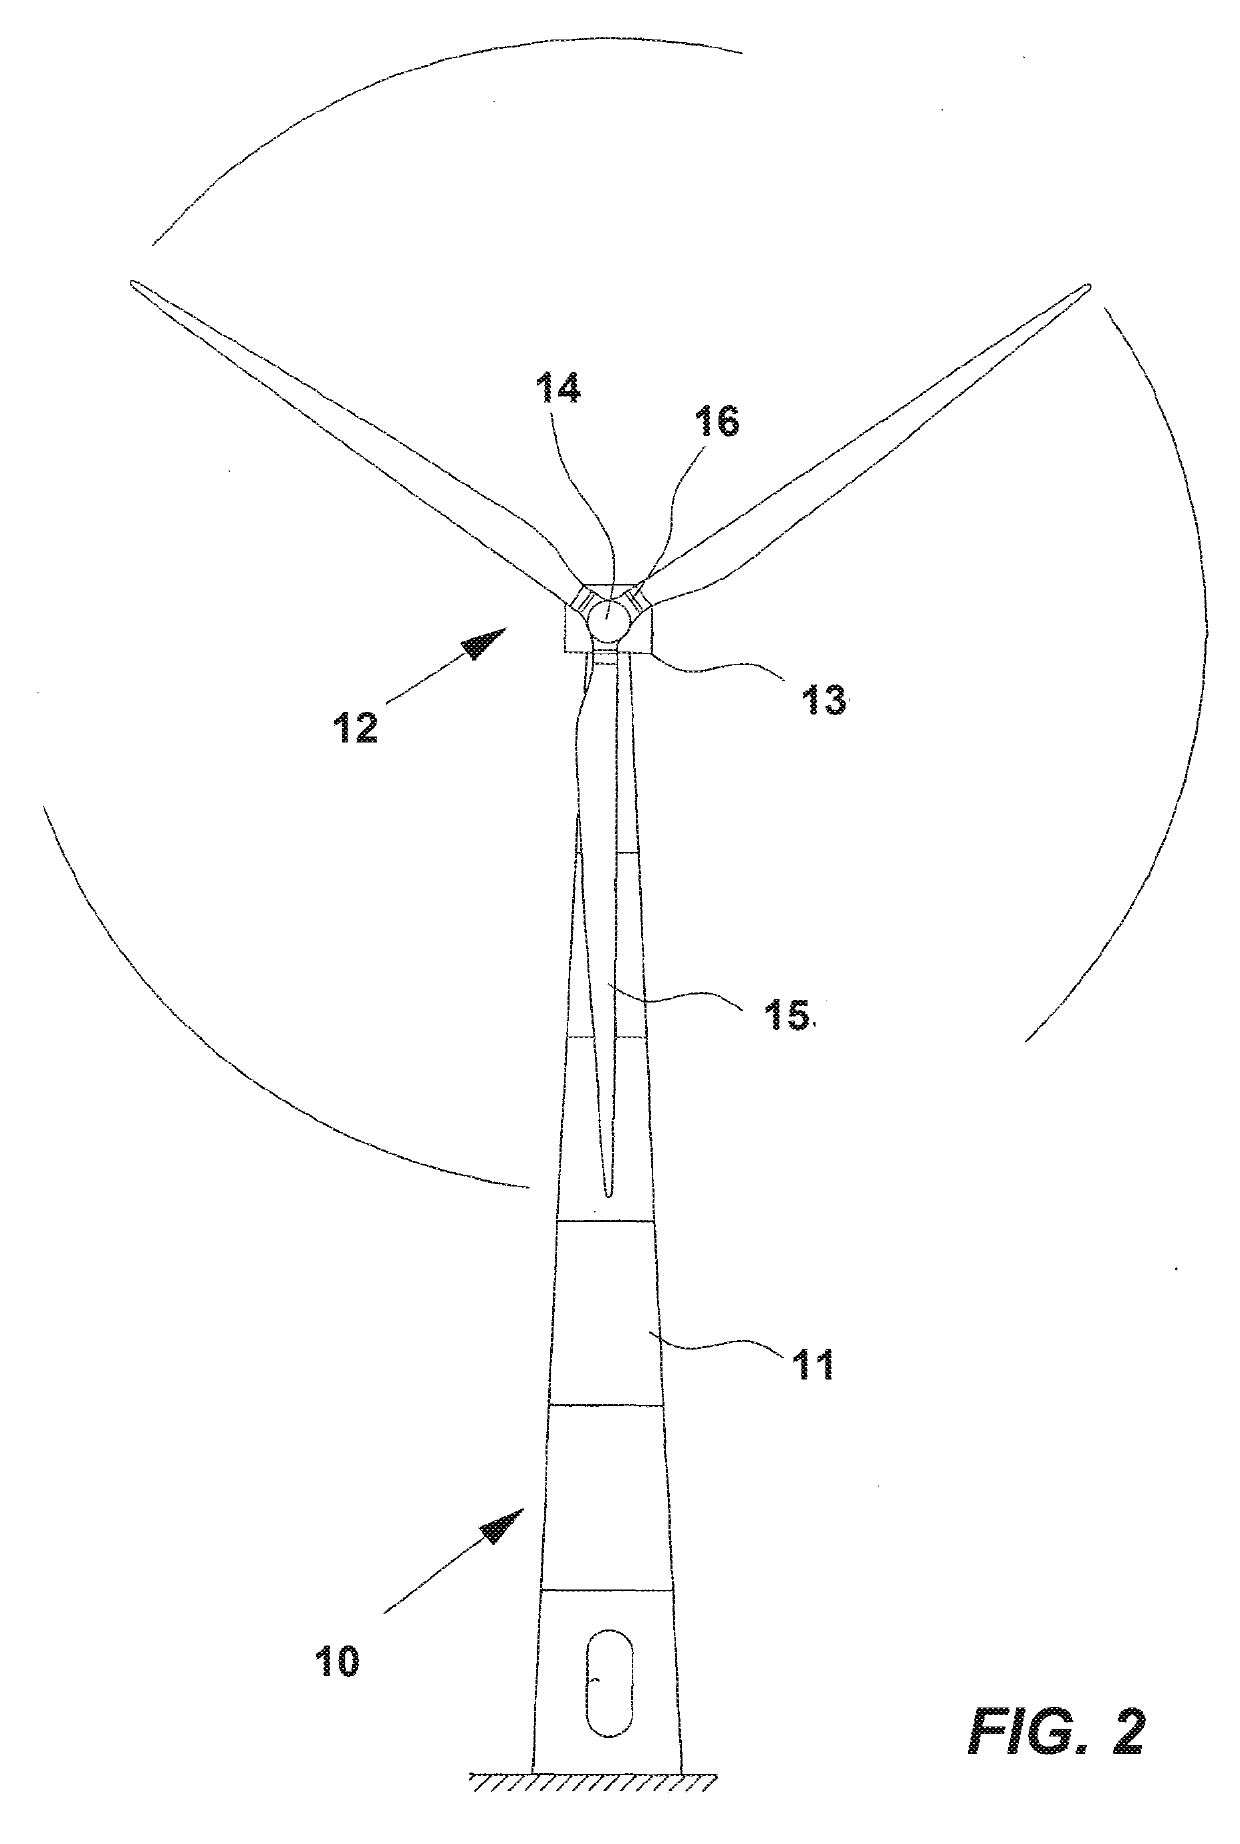 Wind turbine noise analysis and control